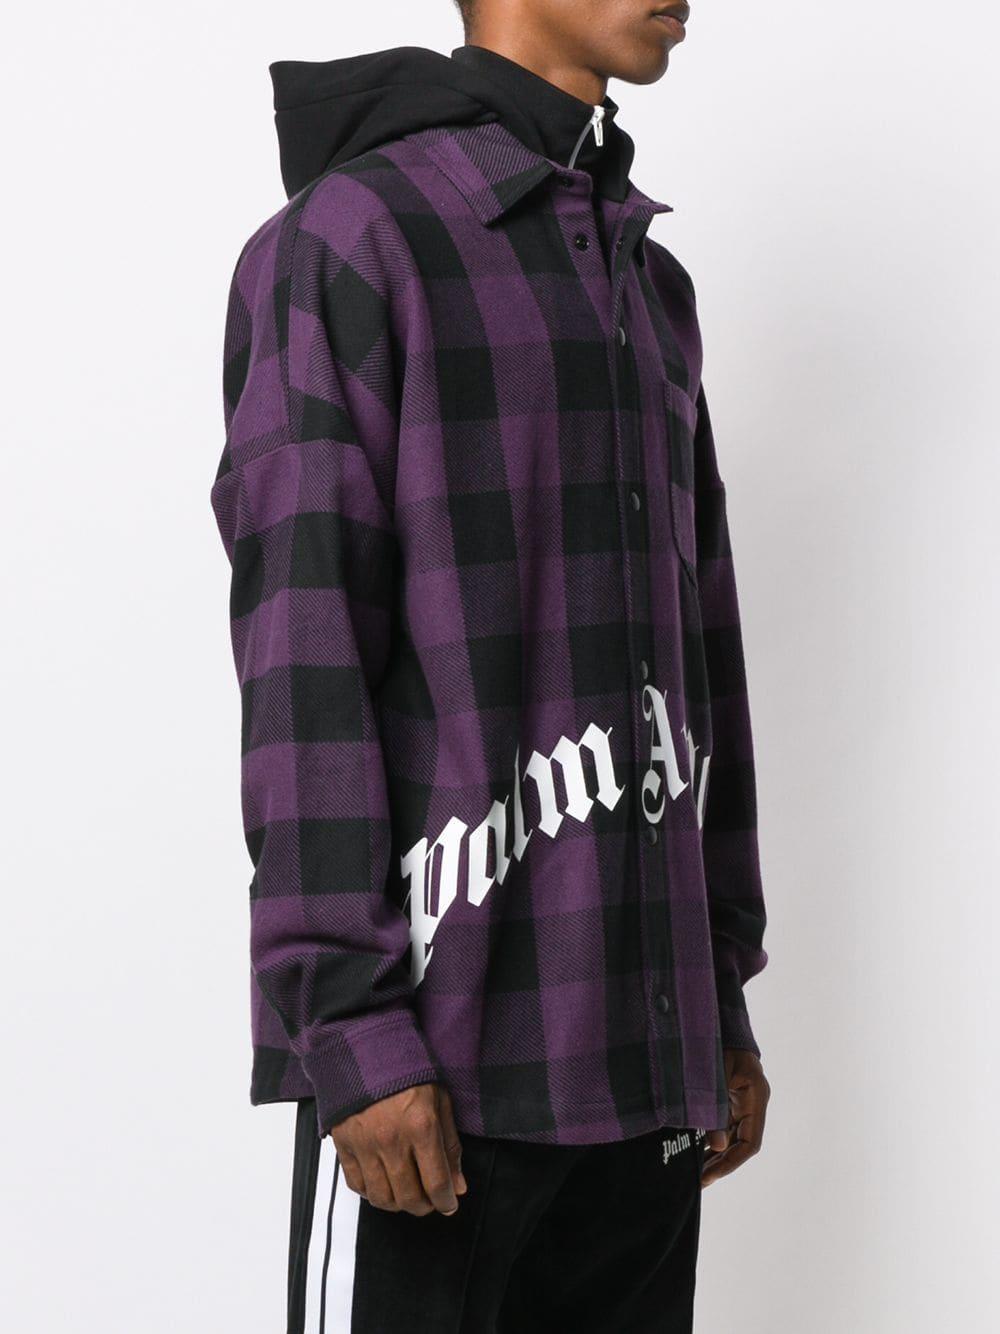 palm angels flannel